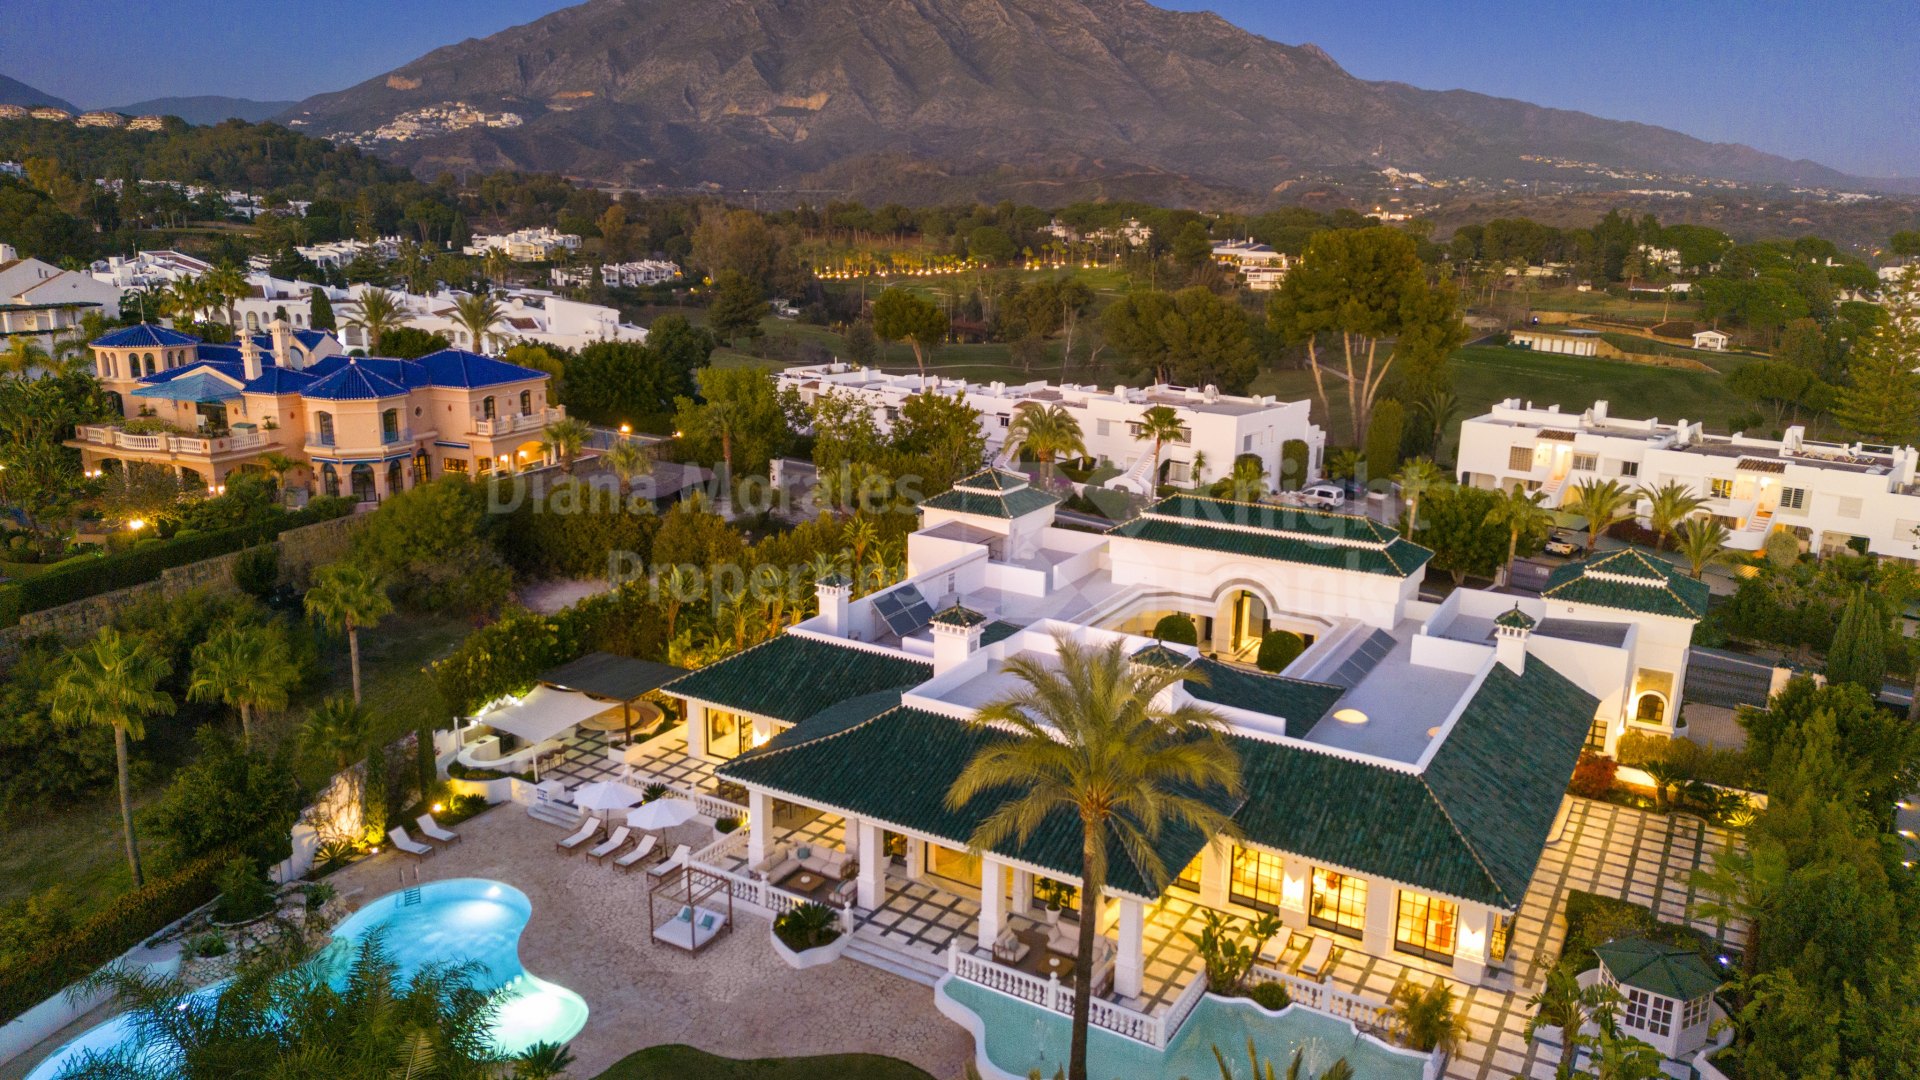 Aloha, Alhambra Palace, luxury and sophistication in the Golf Valley